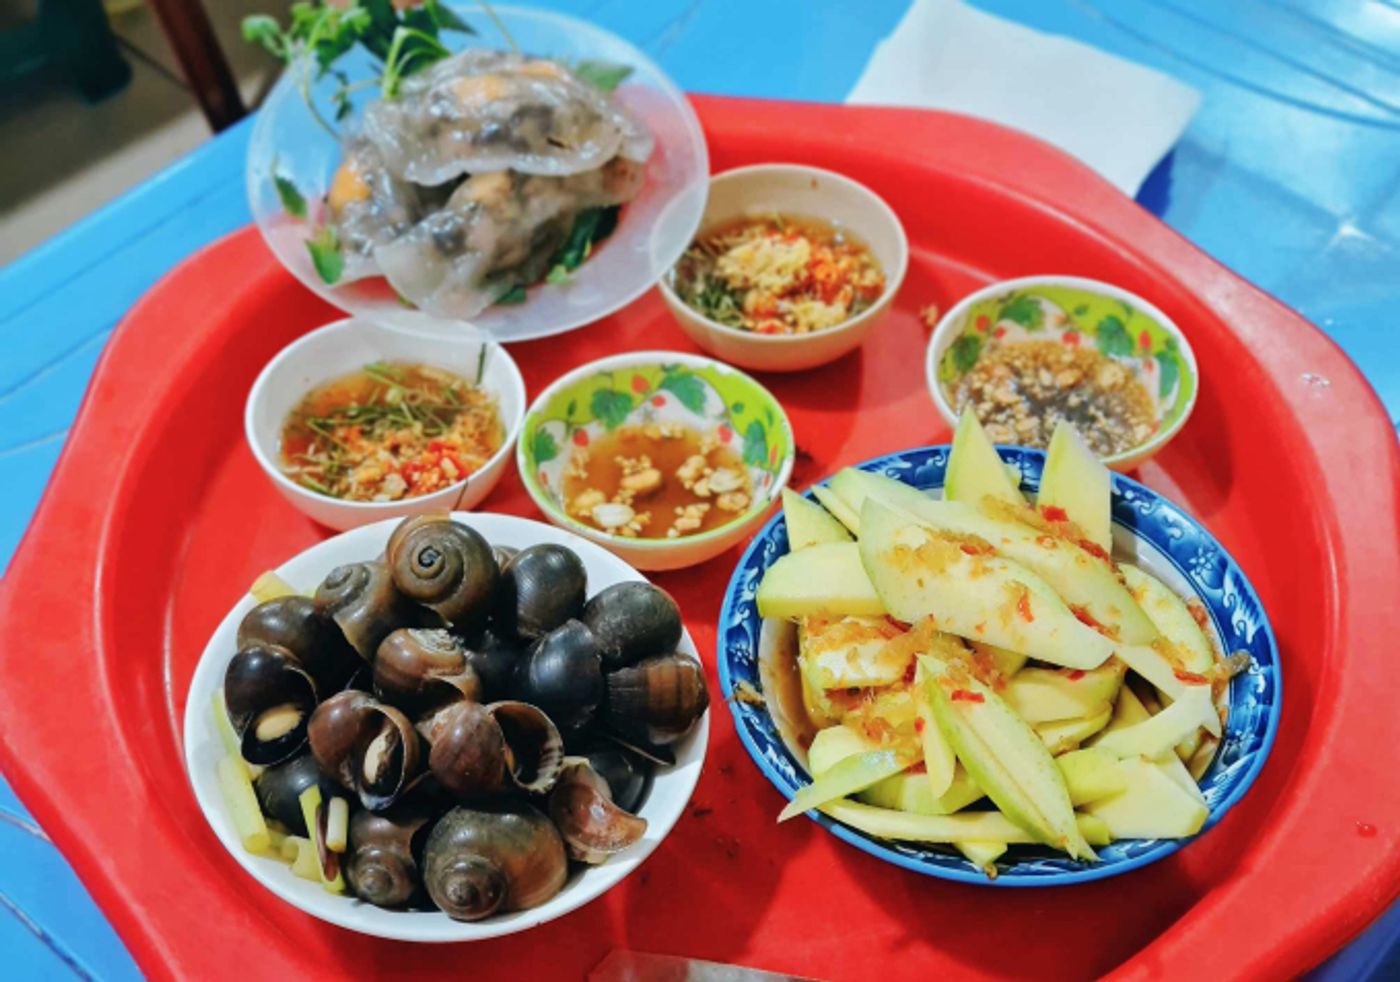 Common accompaniments to boiled snails often include stuffed tapioca dumplings (banh bot loc) and a side of mango mixed with salt and chili. Photo by VnExpress/Nguyen Chi